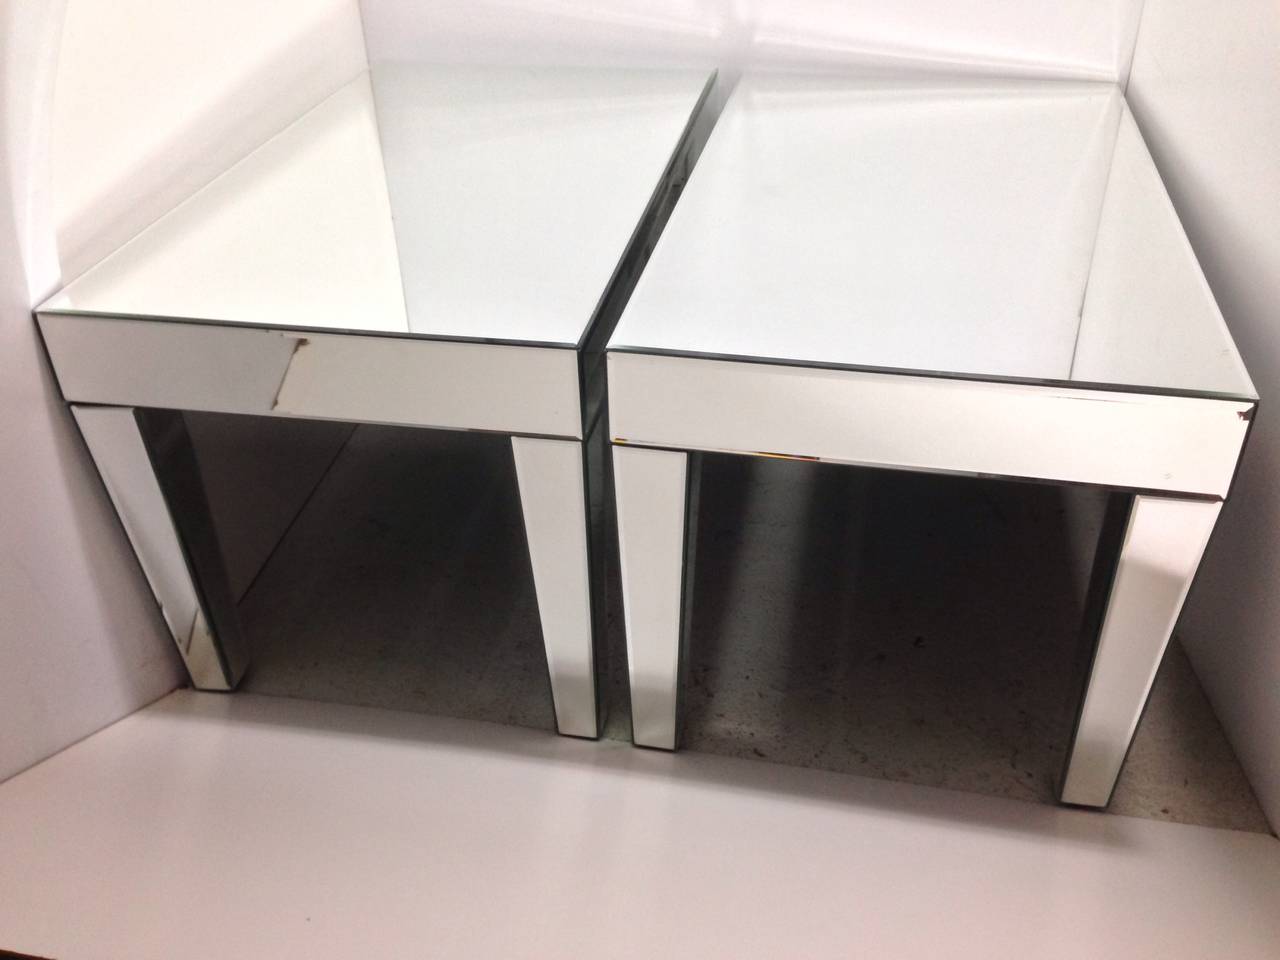 Pair of Mirrored End Tables In Excellent Condition For Sale In Bronx, NY